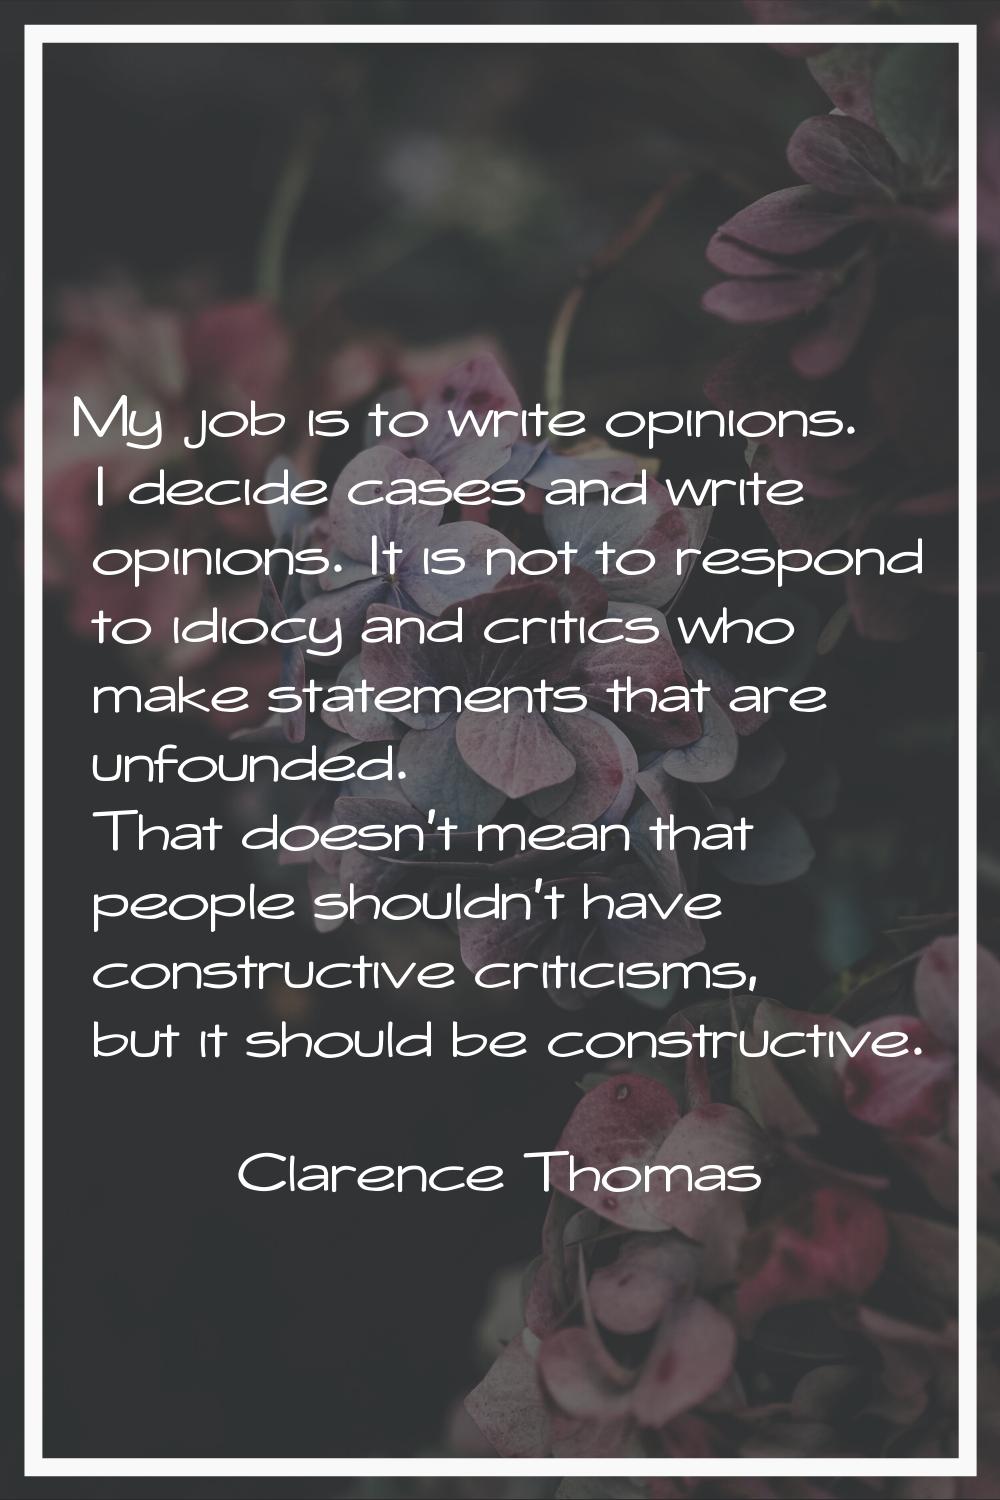 My job is to write opinions. I decide cases and write opinions. It is not to respond to idiocy and 